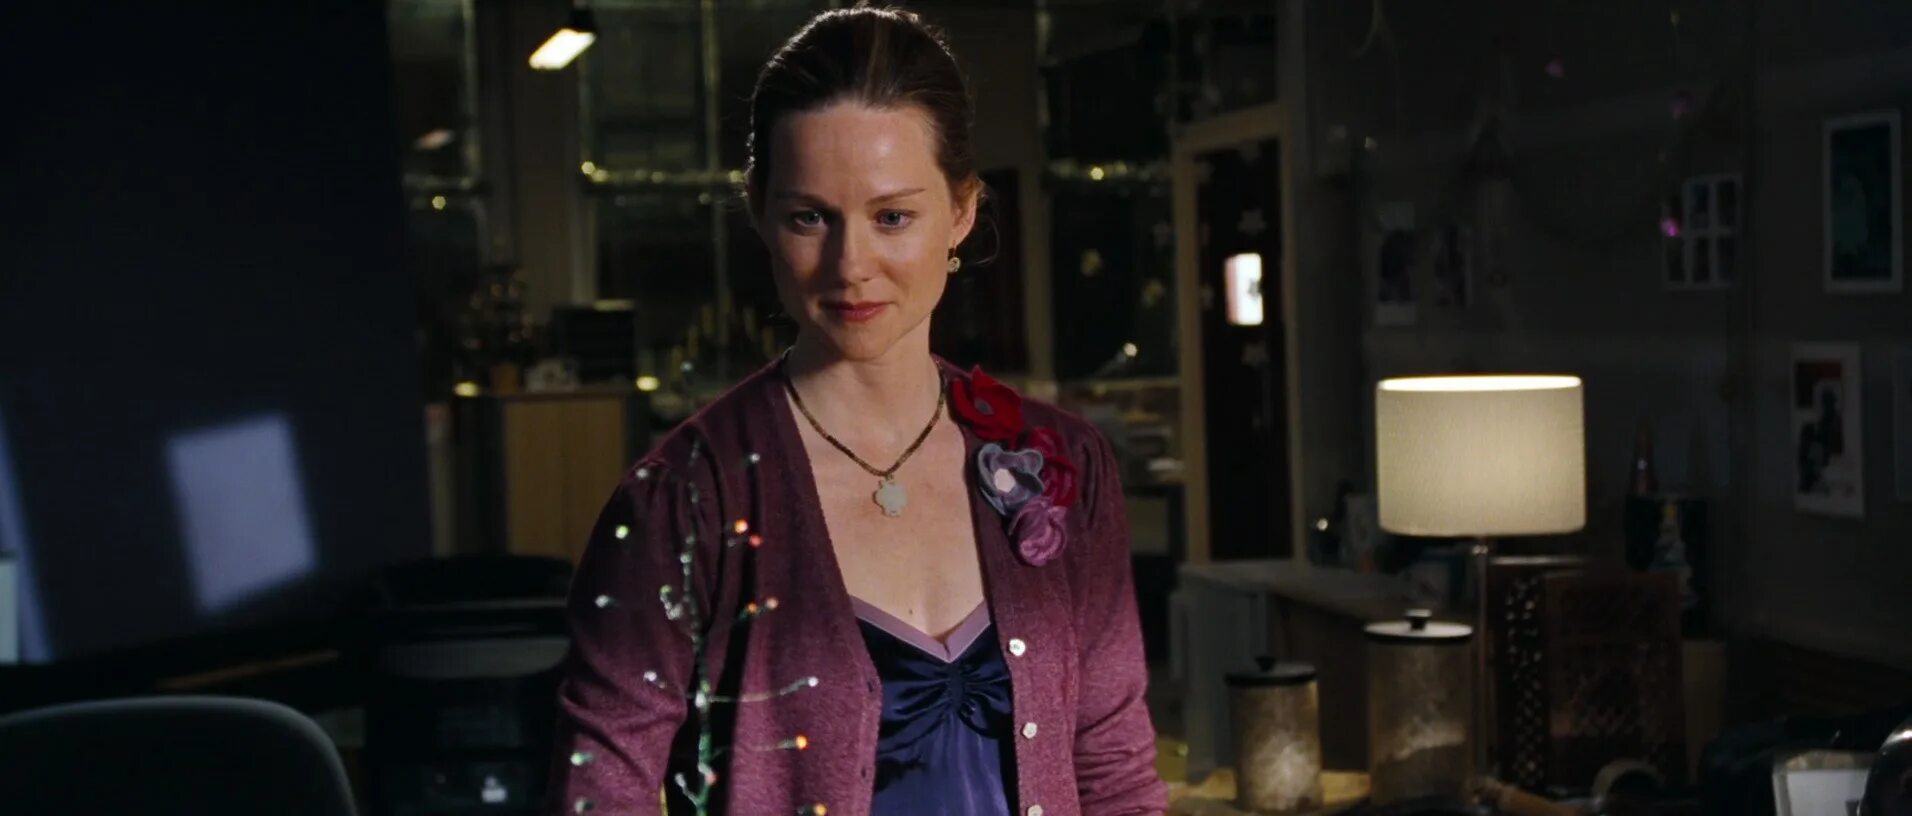 Love lore. Laura Linney Love 2003. Laura Linney in Love actually 2003.